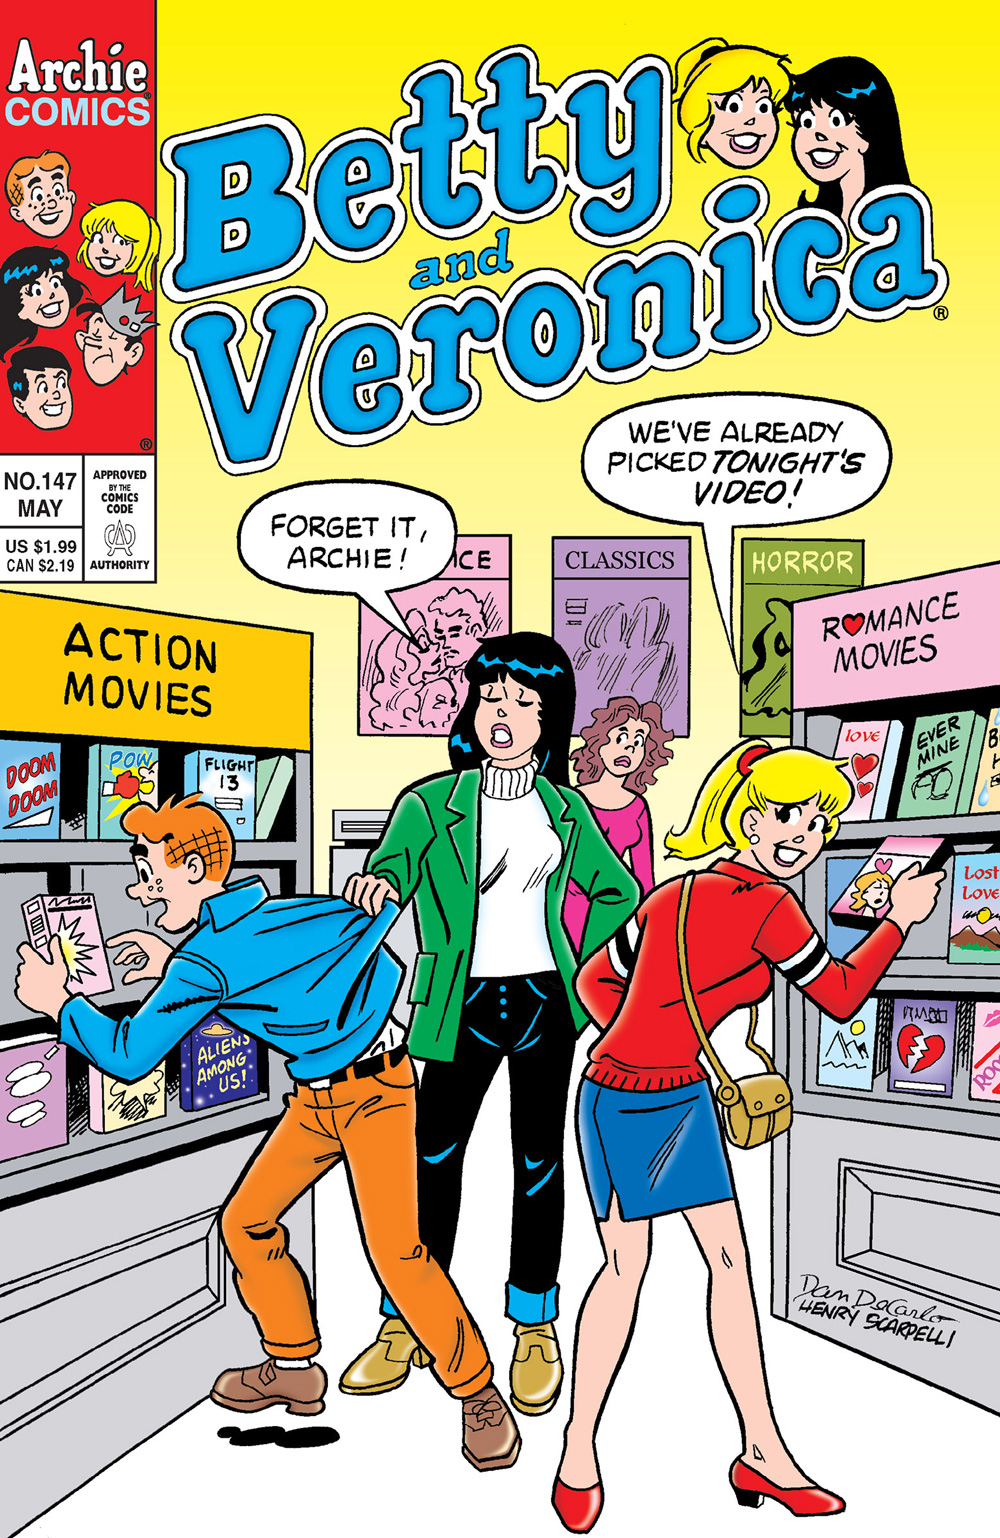 Archie, Betty, and Veronica are in a video store (which old people will remember is a place where you had to go to physically rent and buy movies in the last millennium). Archie is excited about an action movie, but Veronica tells him that she and Betty have already picked a romance movie to watch tonight instead.